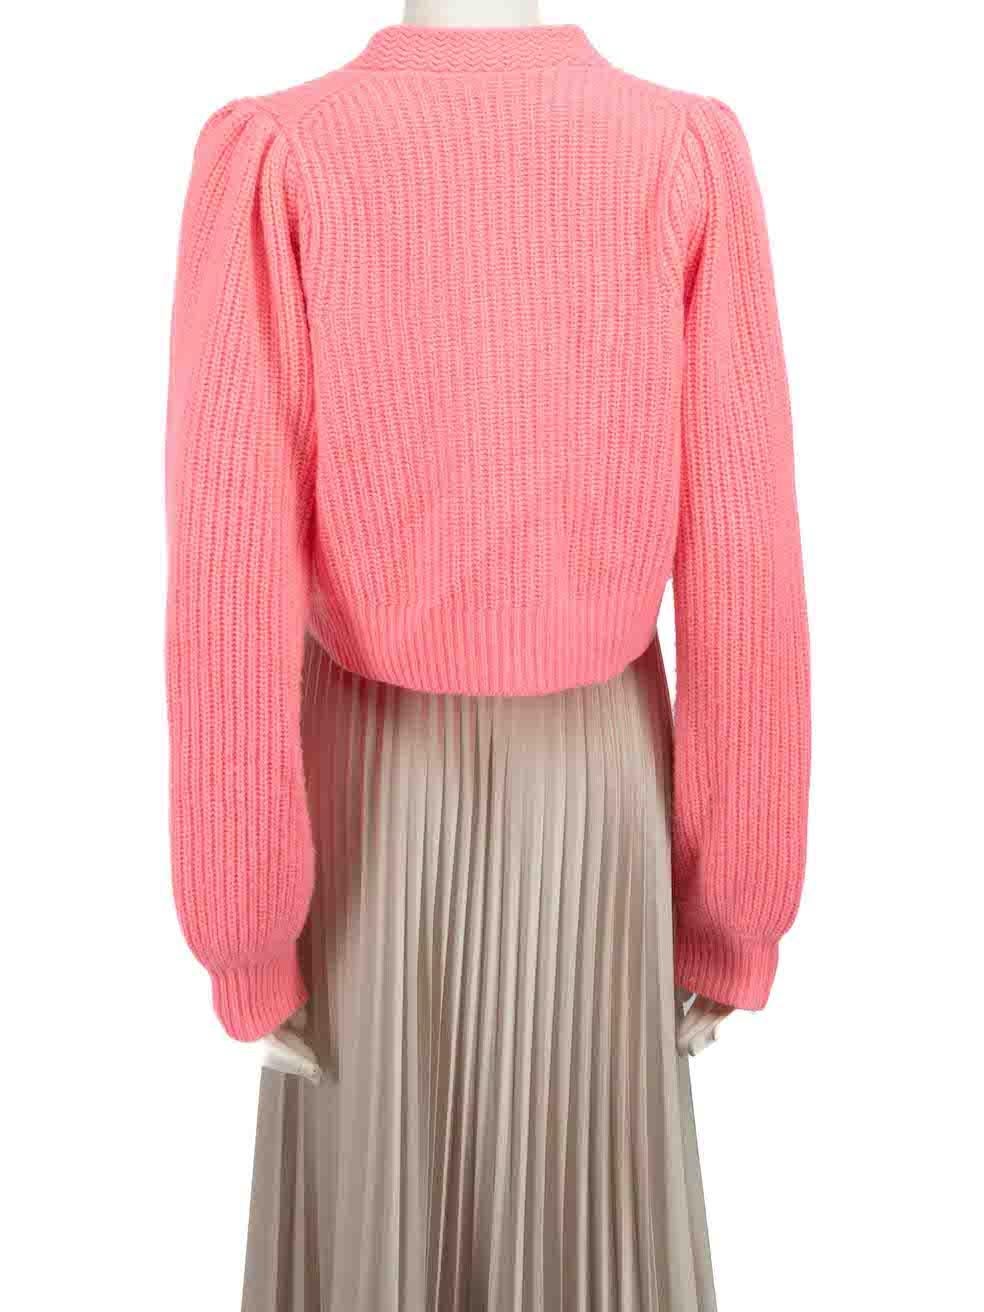 LoveShackFancy Pink Wool Knitted Cardigan Size XL In Good Condition For Sale In London, GB